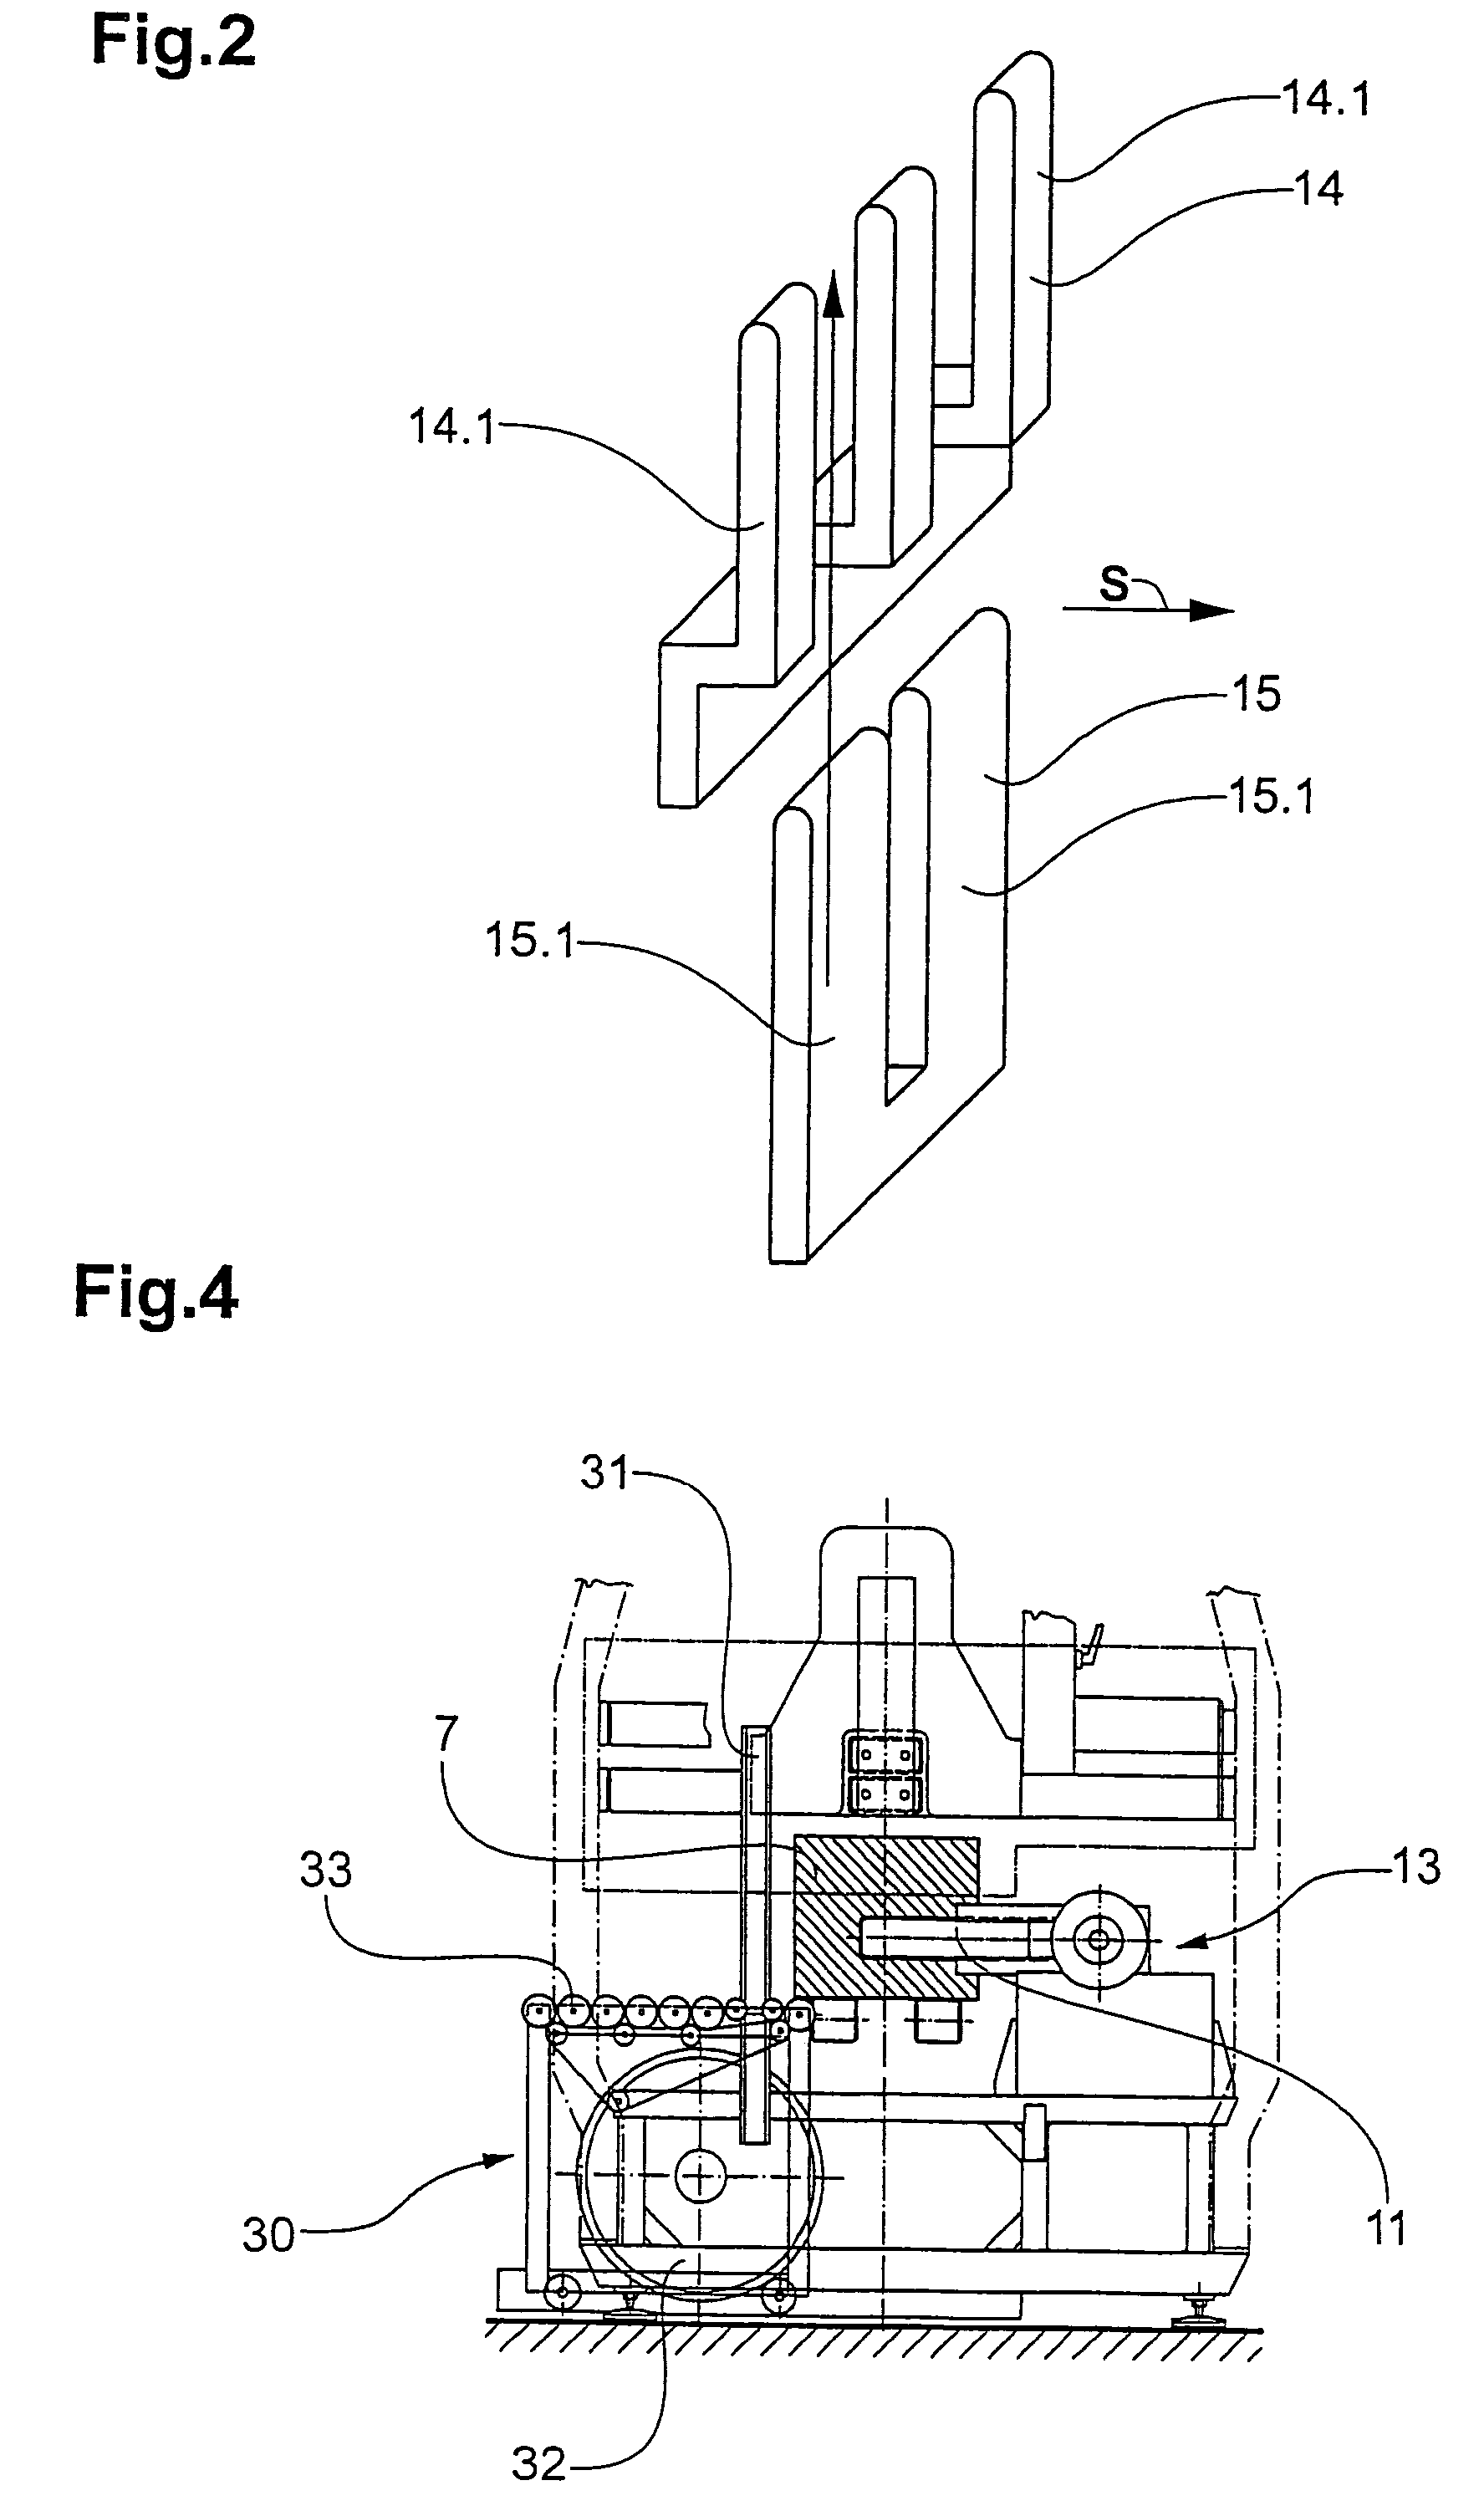 Method and device for forming horizontal stacks of printed products and securing said stacks with straps